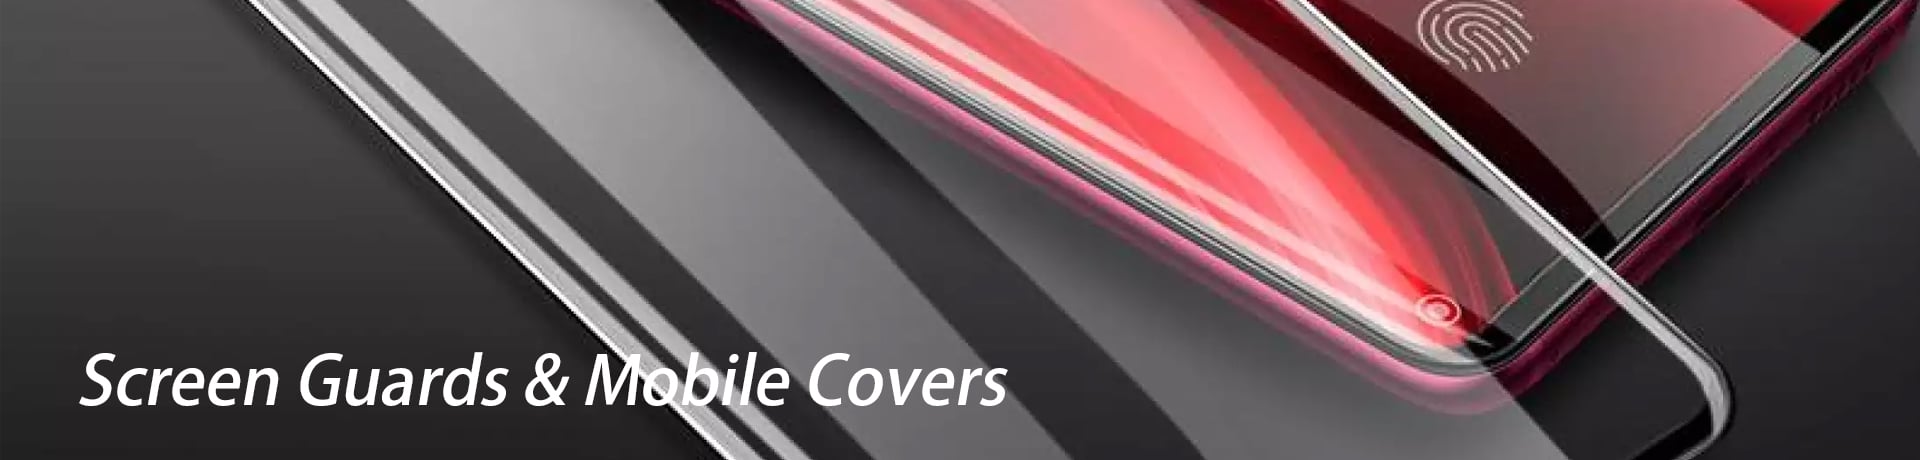 Screenguards & Mobile Covers